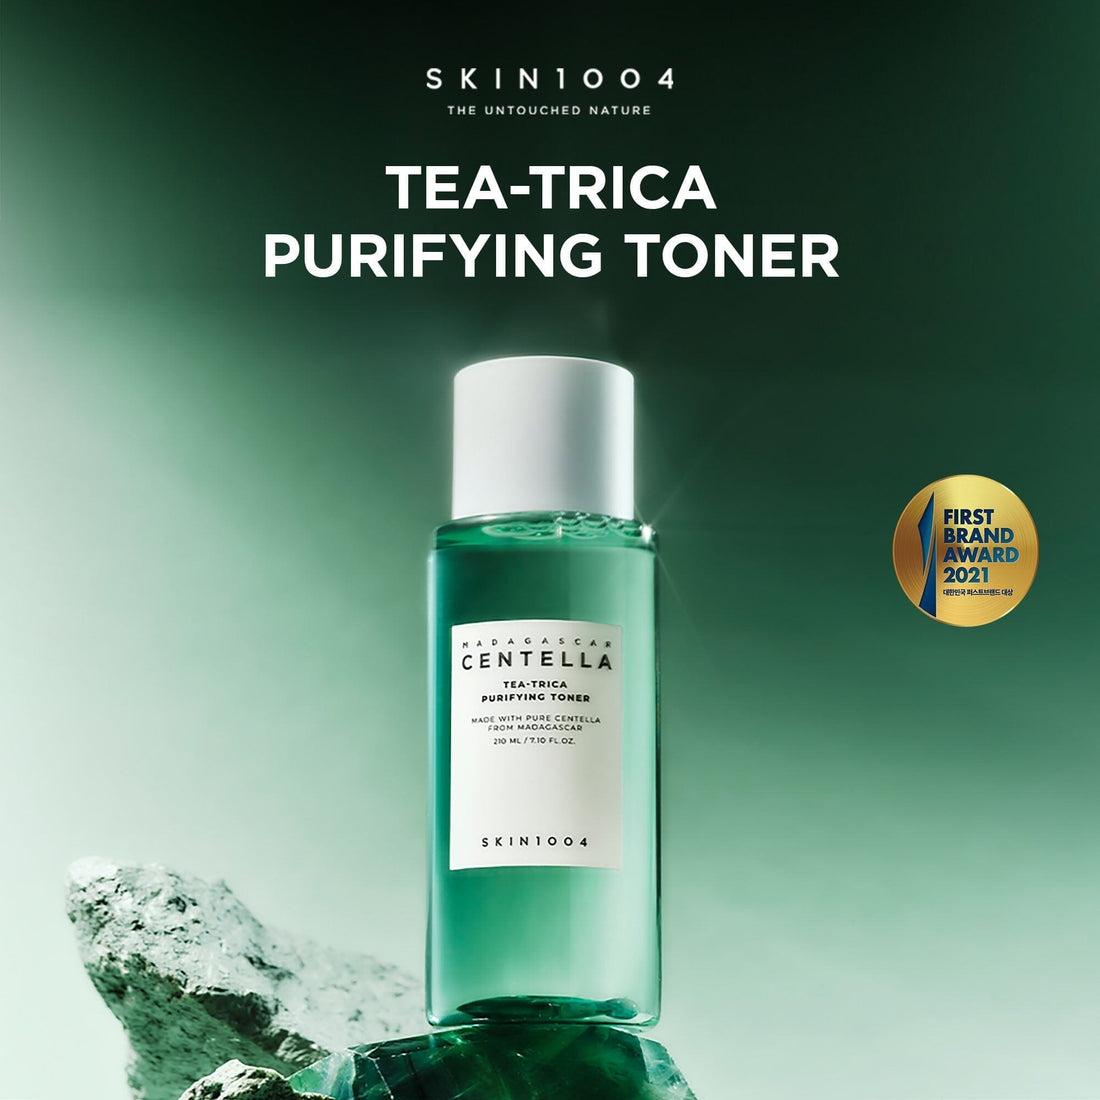 SKIN1004 Madagascar Centella Tea-Trica Relief Ampoule + Purifying Toner, at Orion Beauty. SKIN1004 Official Sole Authorized Retailer in Sri Lanka!